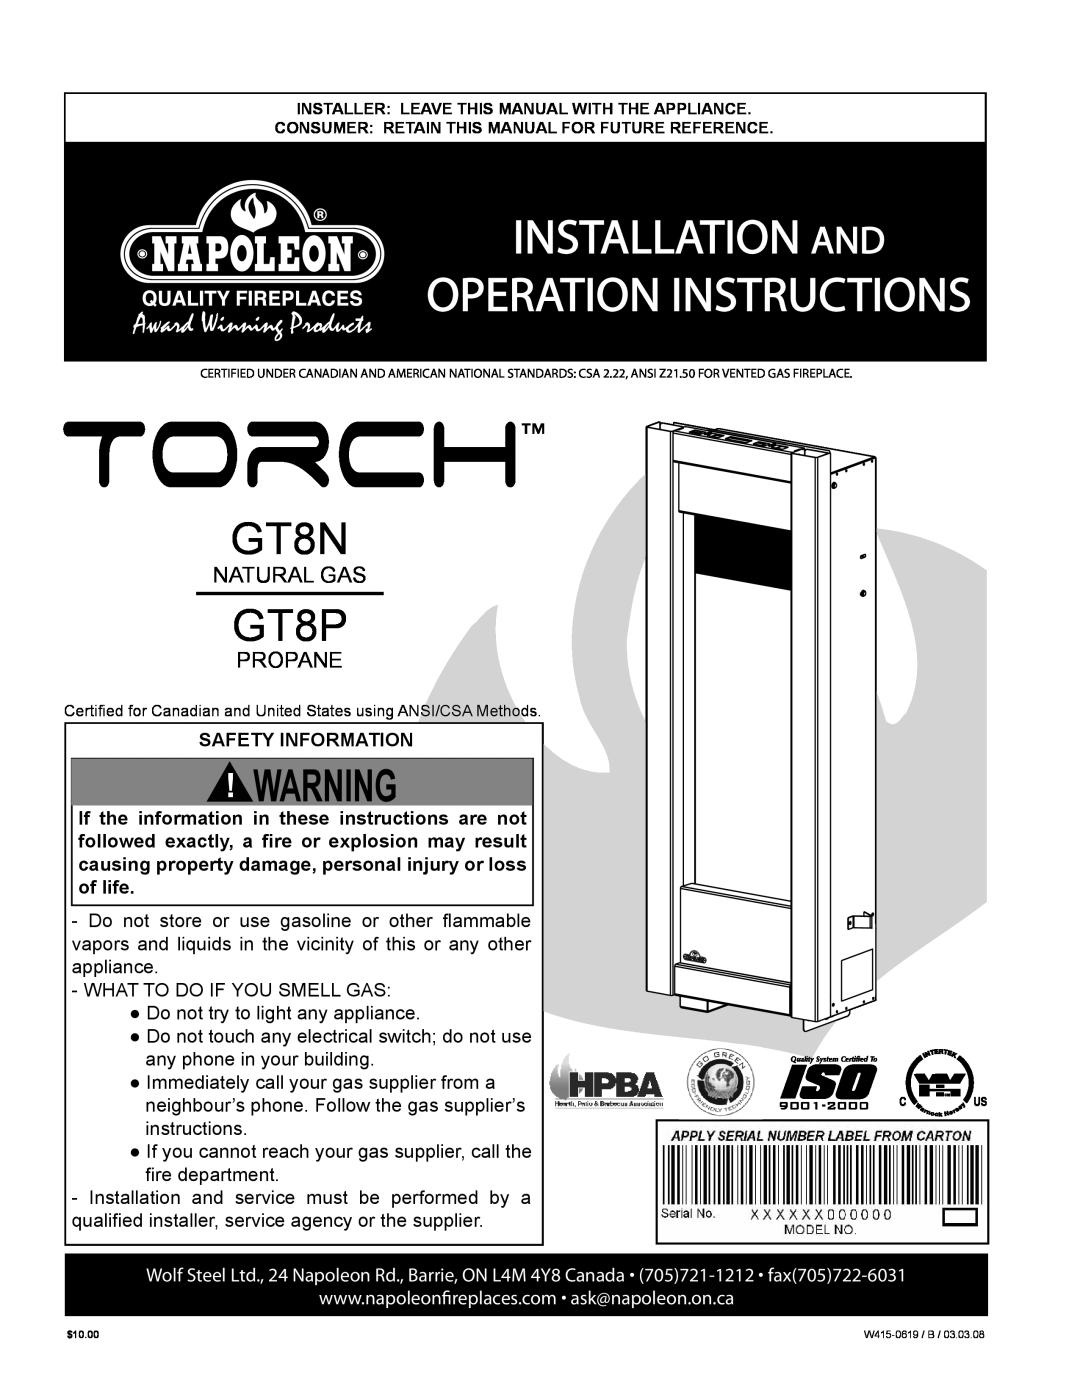 Napoleon Fireplaces GT8N manual Installation And, Operation Instructions, GT8P, Natural Gas, Propane, Safety Information 